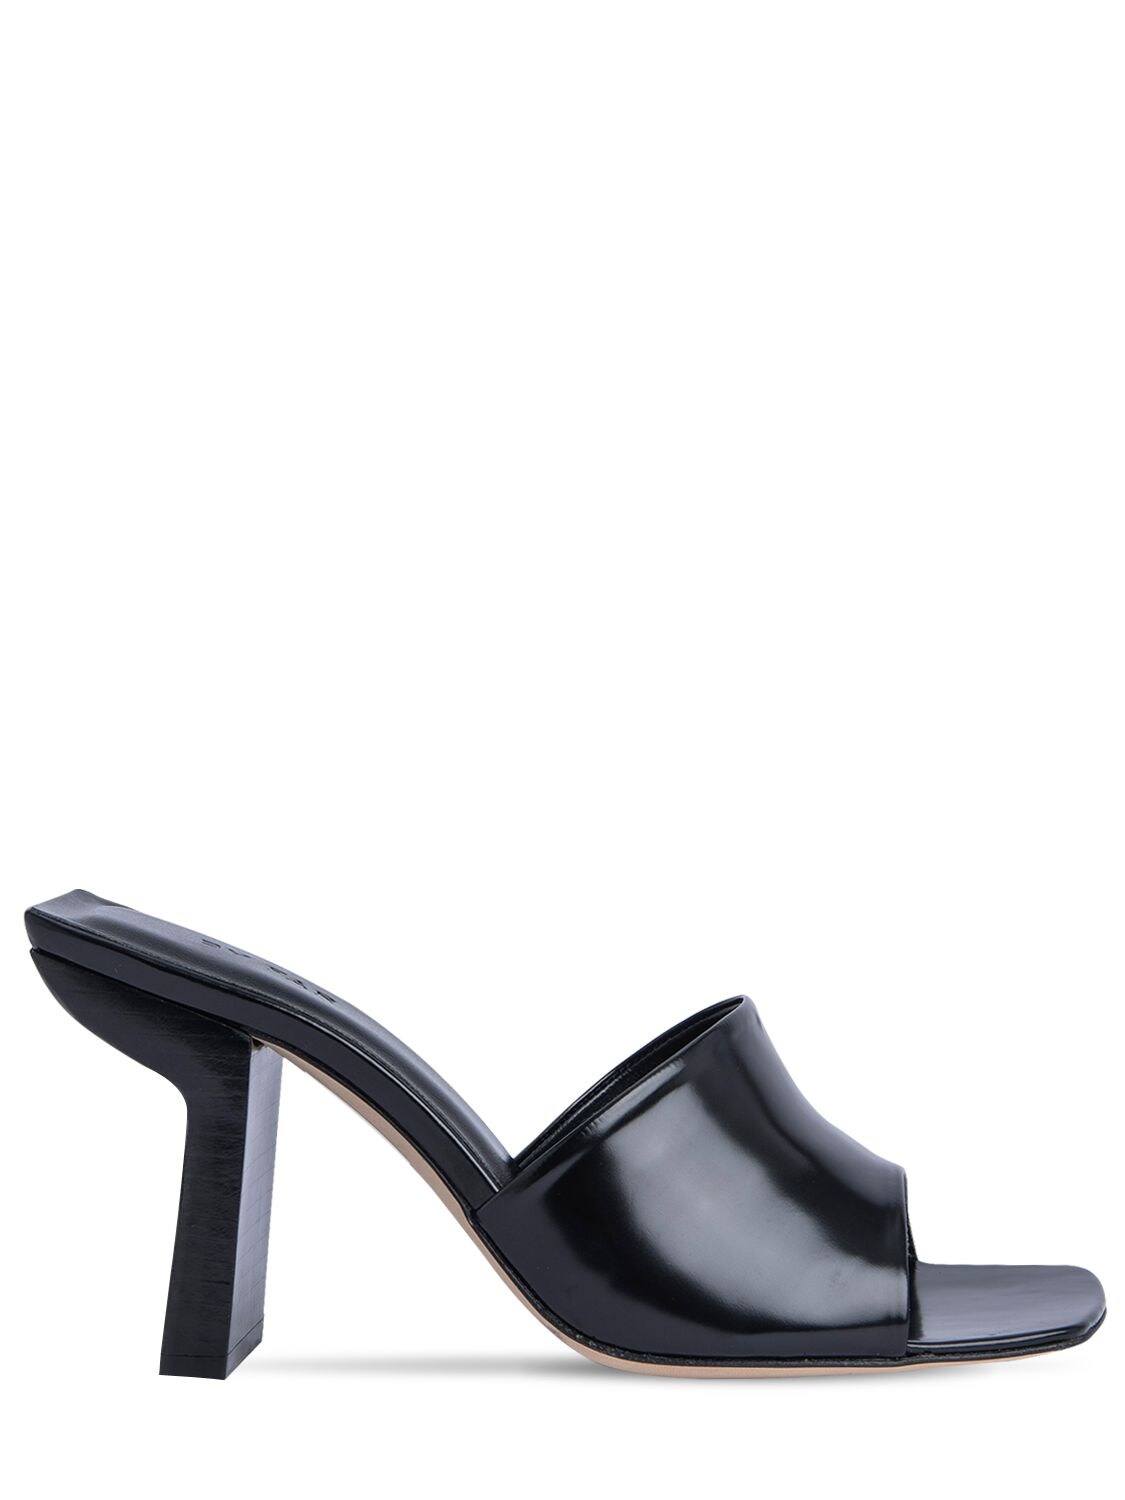 BY FAR 90MM LILIANA PATENT LEATHER MULES,73I6TG008-QKXX0